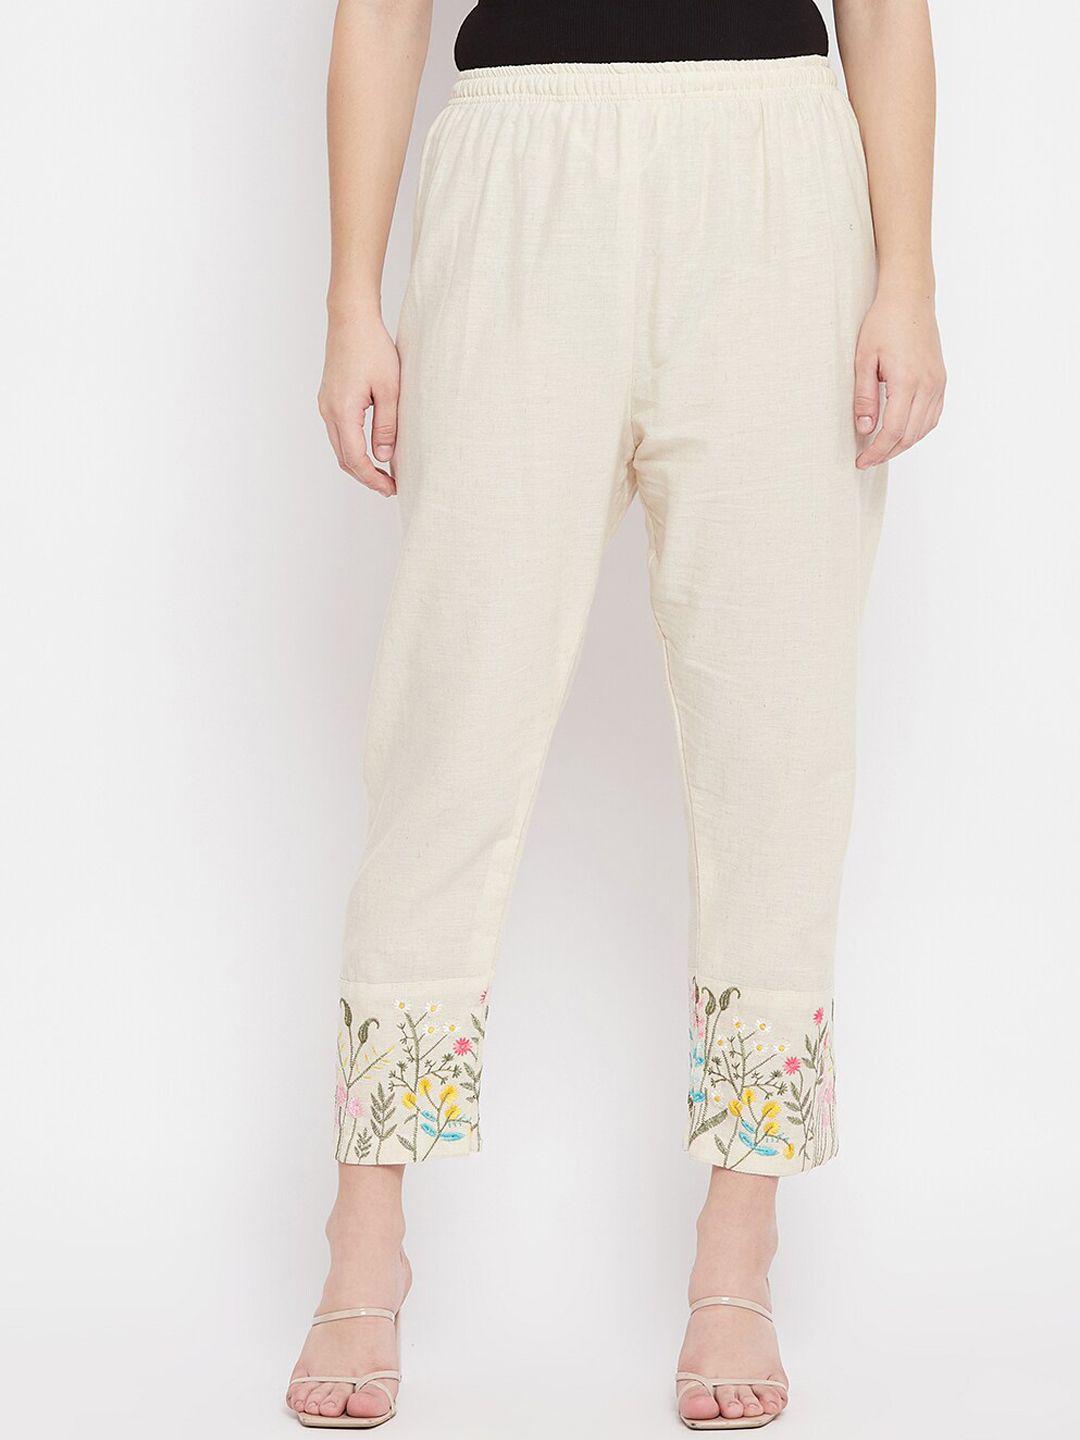 clora-creation-women-beige-floral-embroidered-cotton-trousers